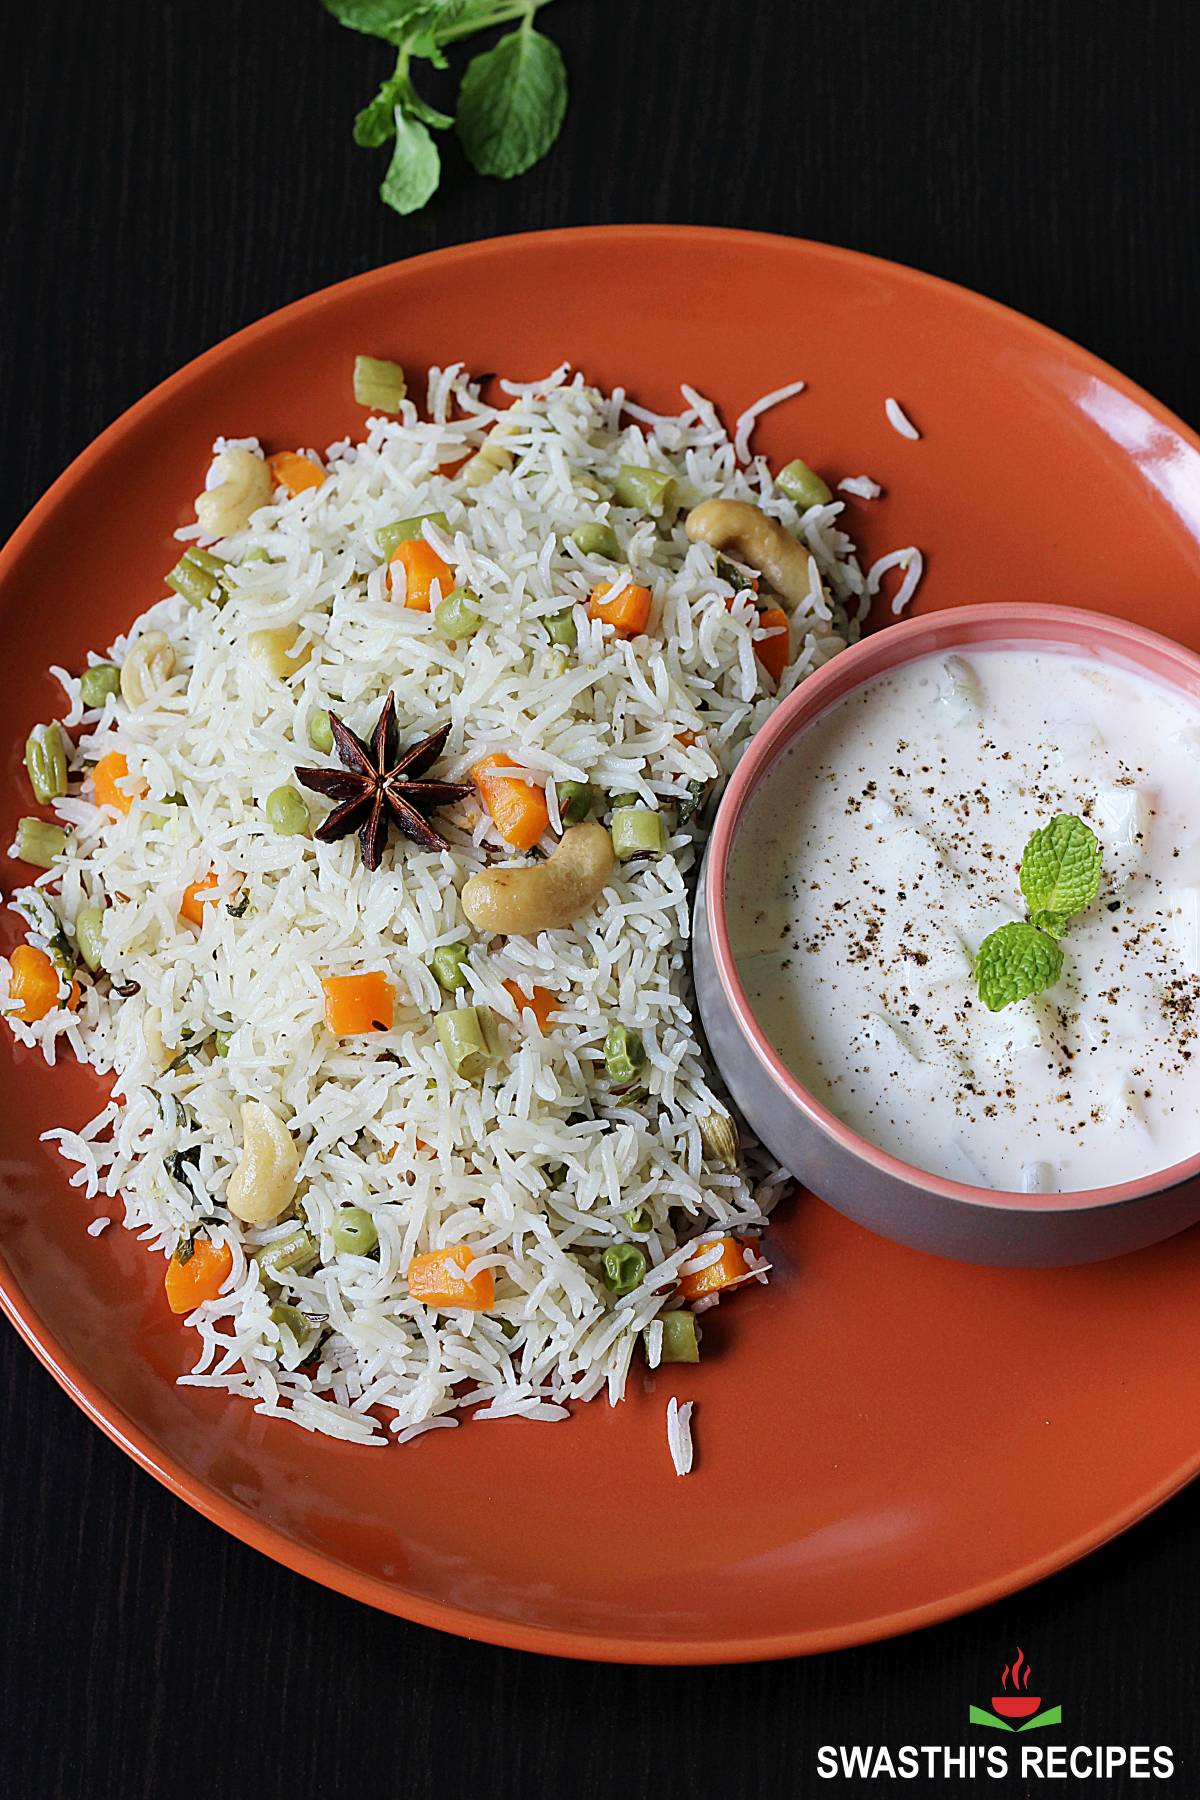 Coconut milk rice made with spices and coconut milk